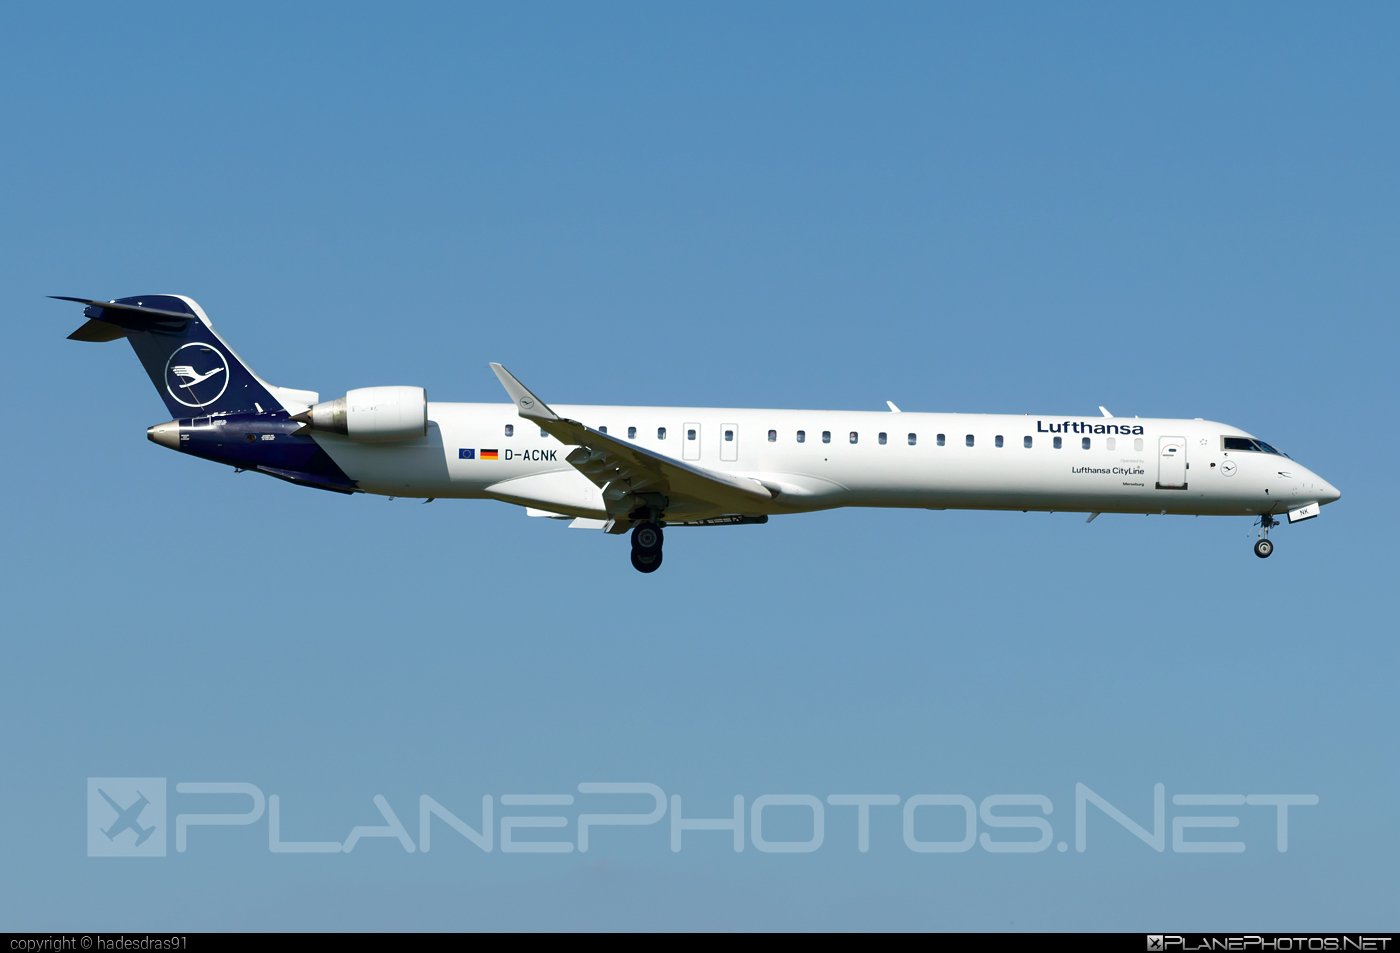 Bombardier CRJ900LR - D-ACNK operated by Lufthansa CityLine #bombardier #crj900 #crj900lr #lufthansa #lufthansacityline